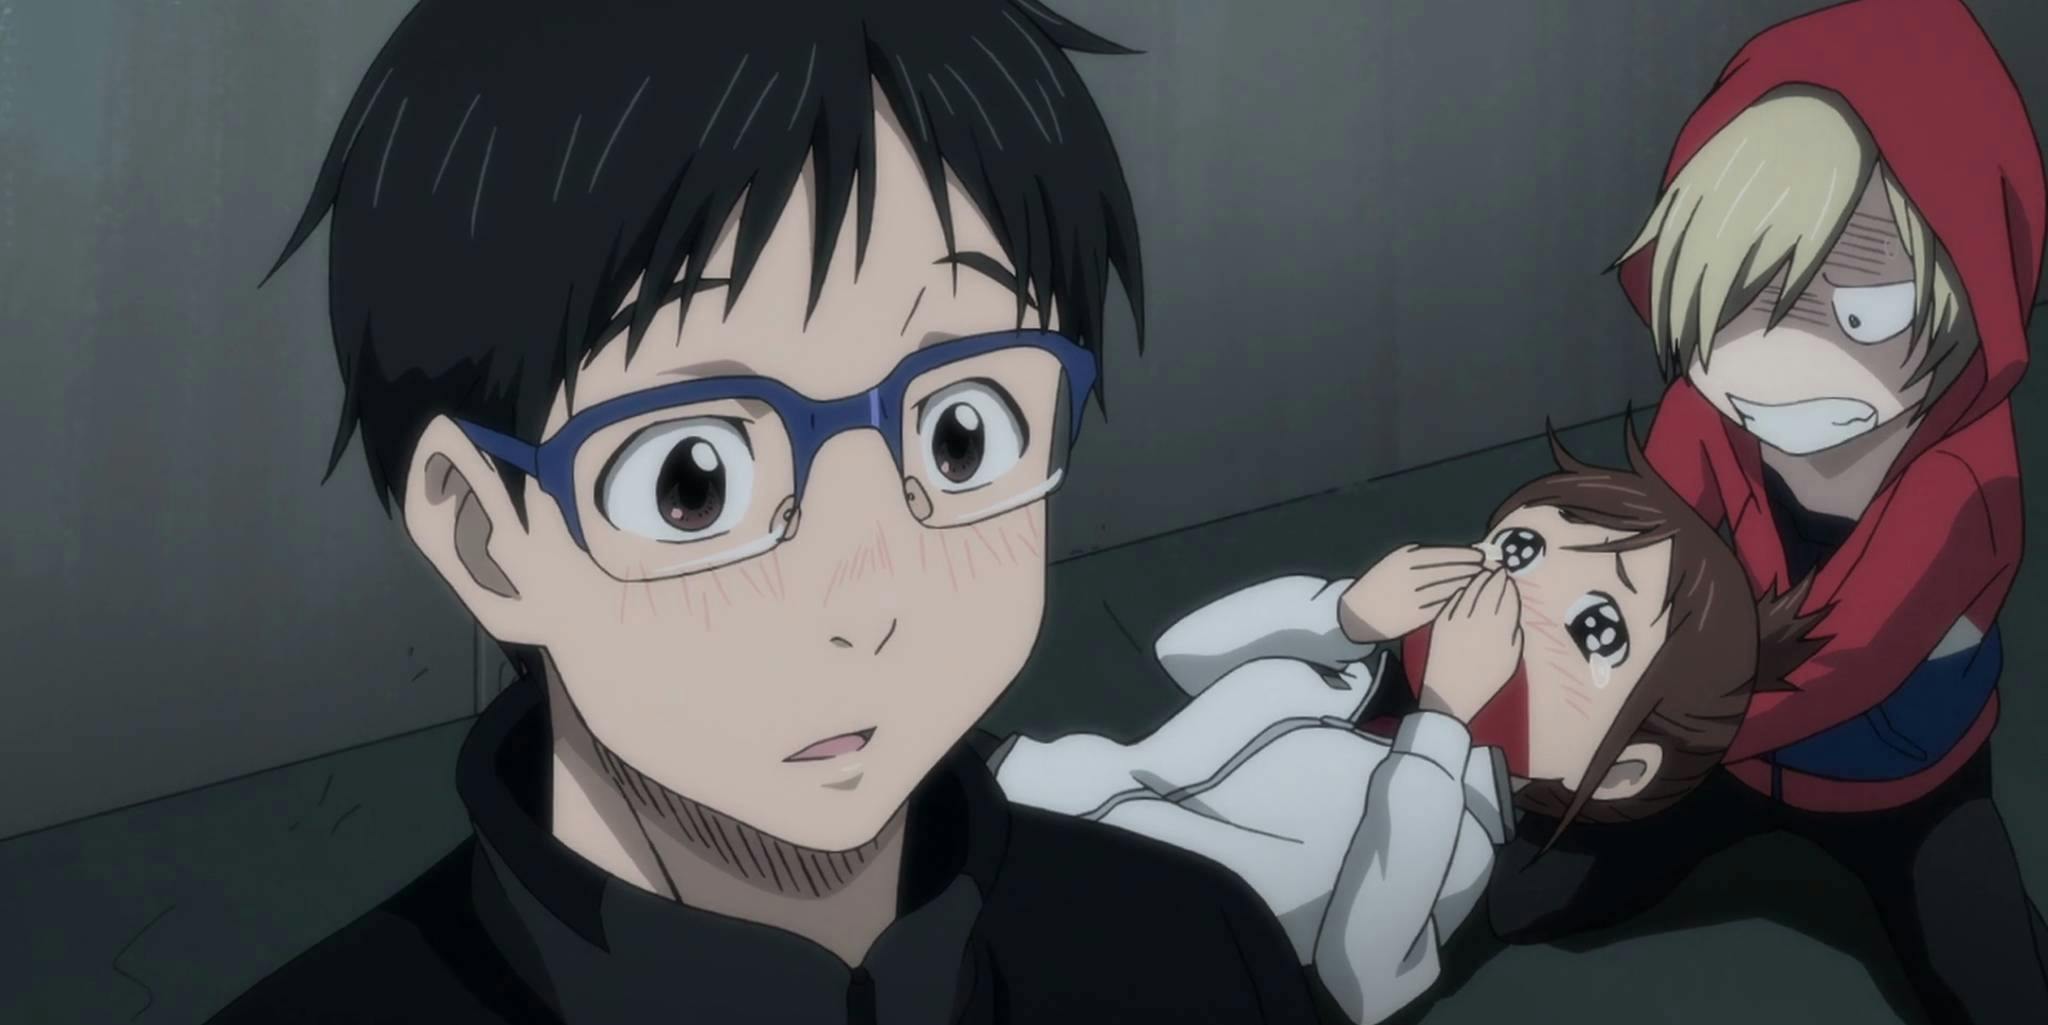 IMDb's 'Yuri on Ice' Warnings Are Completely Ridiculous